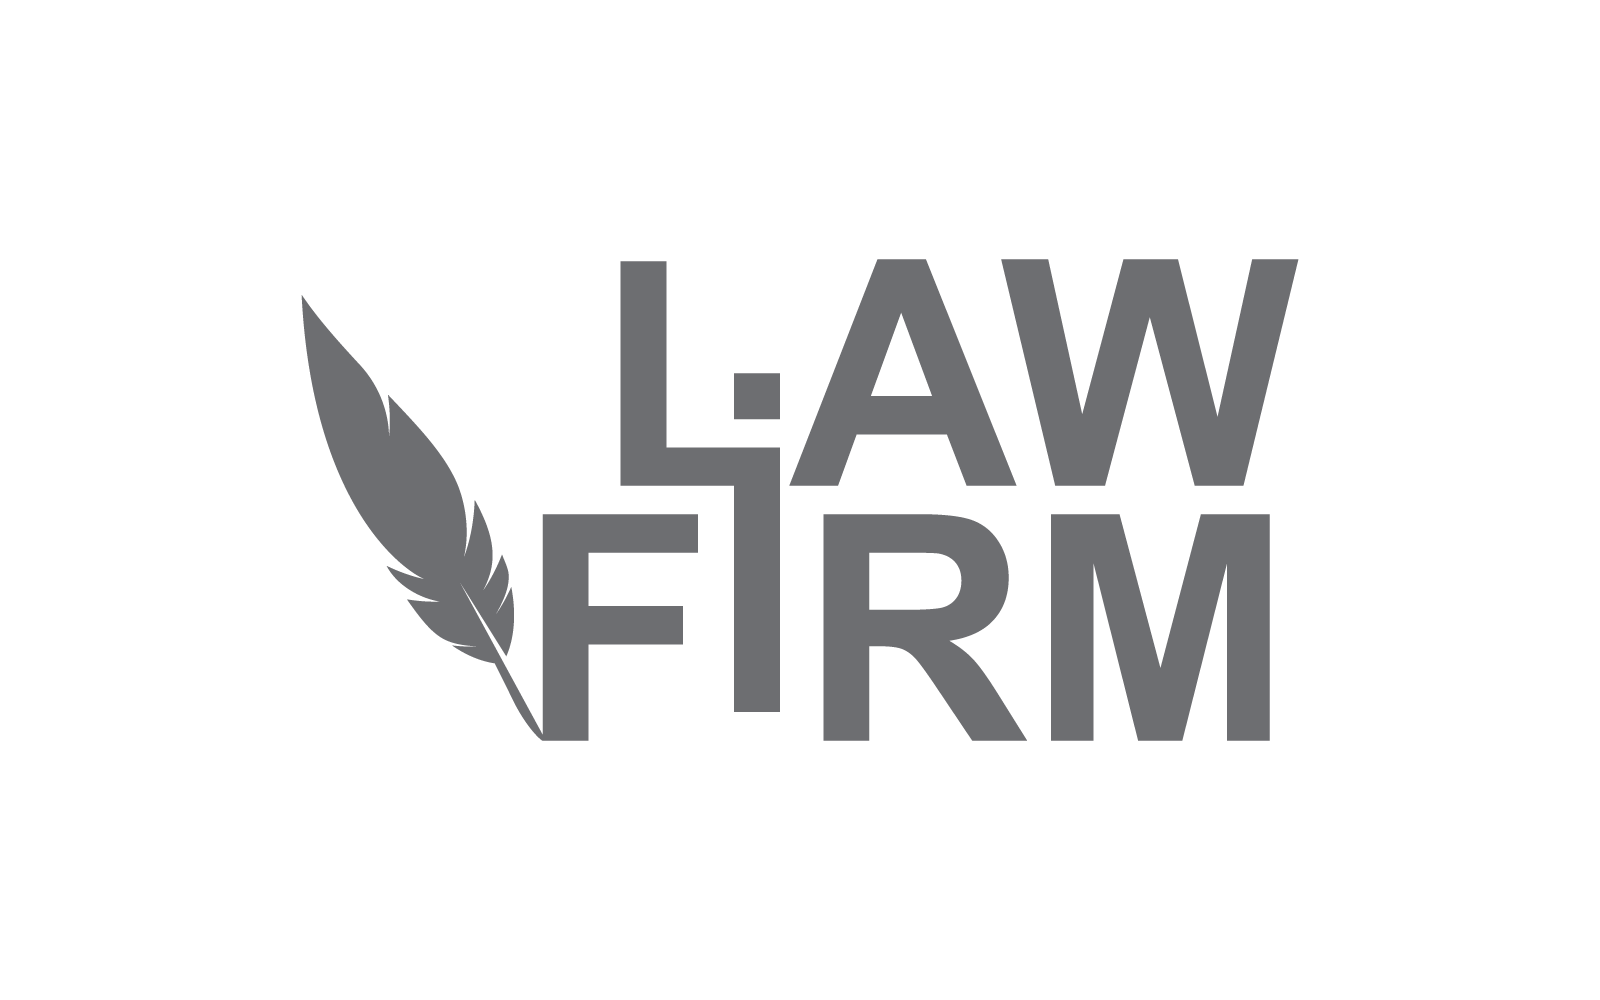 Law firm Feather illustration logo icon vector flat design template